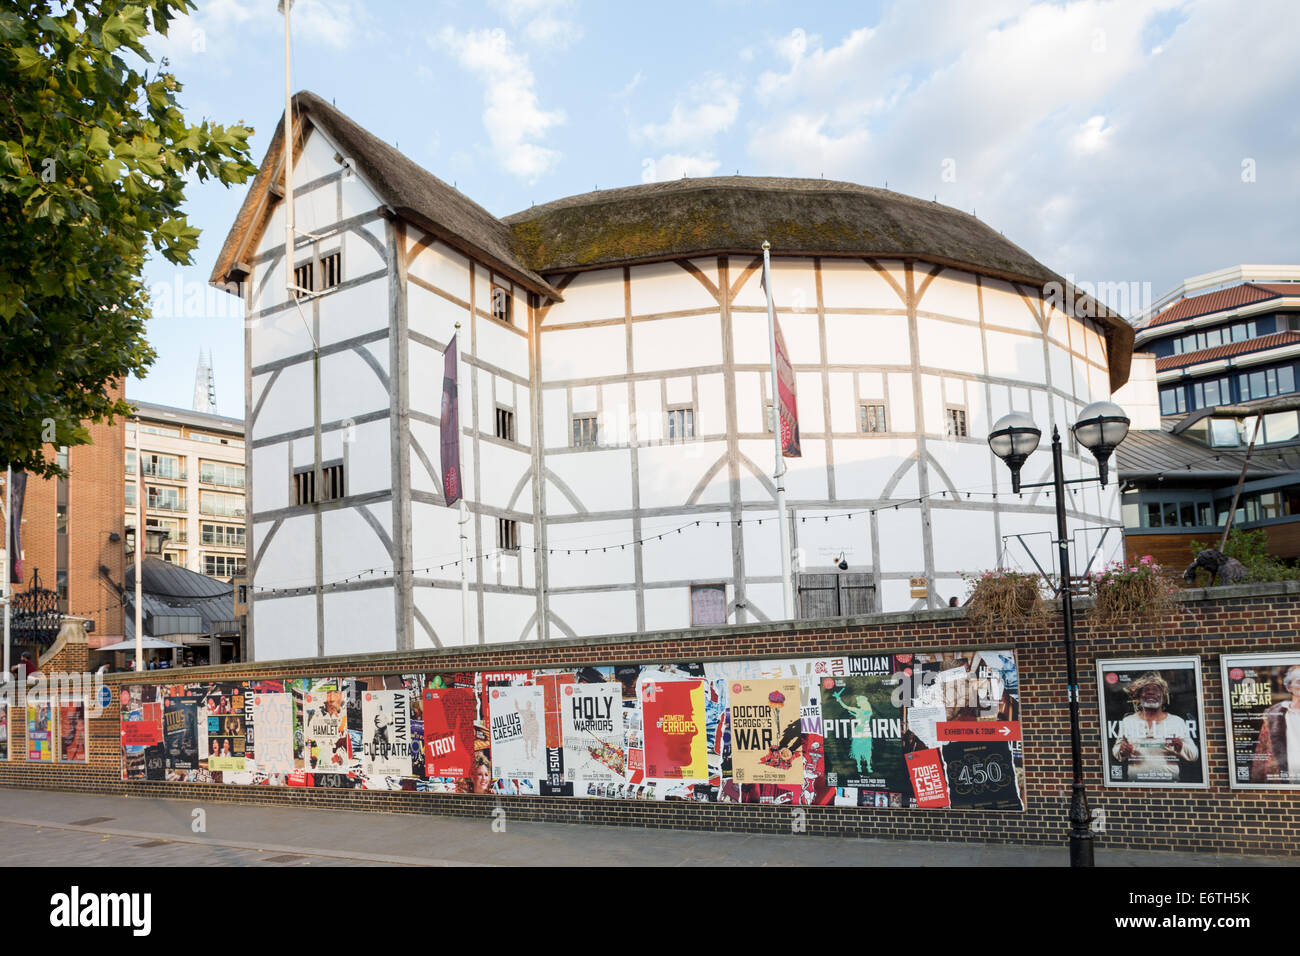 Shakespeare's Globe Theatre, London, UK Banque D'Images